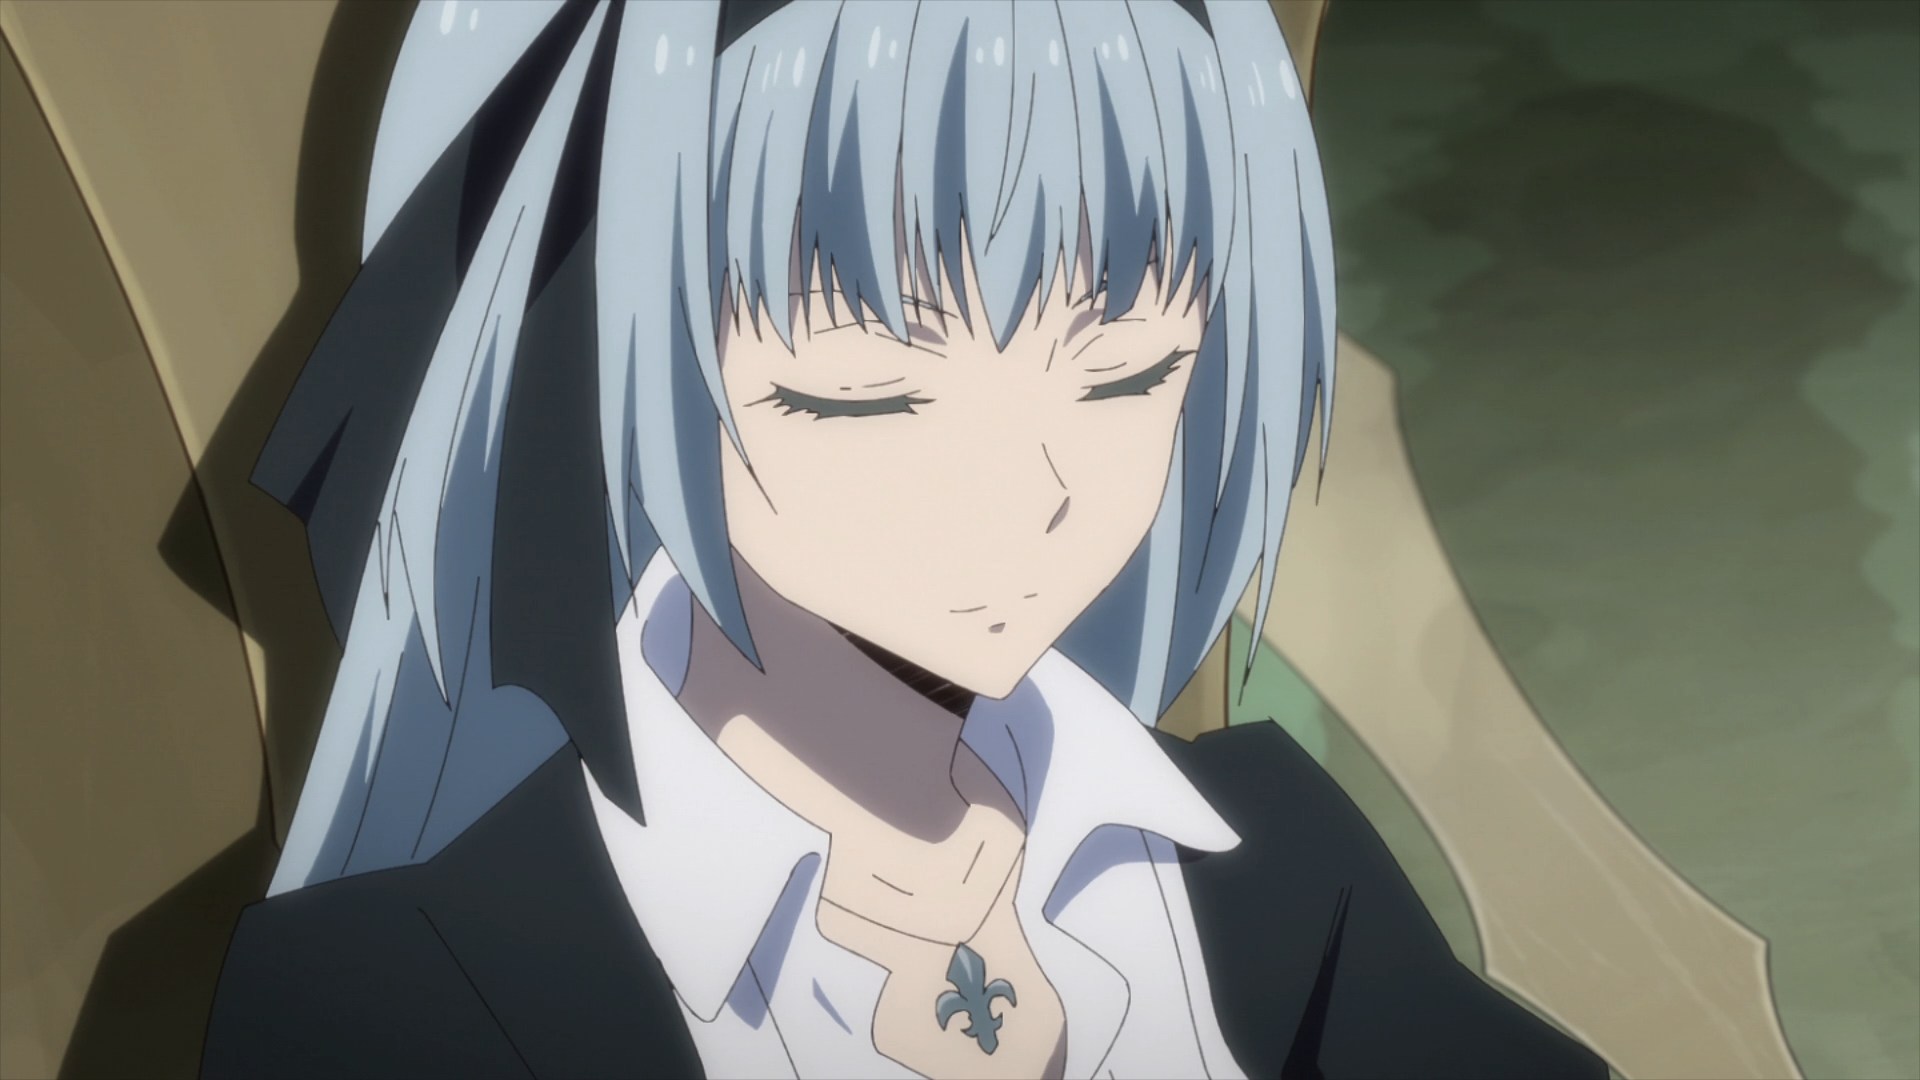 That Time I Got Reincarnated As A Slime: Scarlet Bonds' theme song and  insert songs revealed